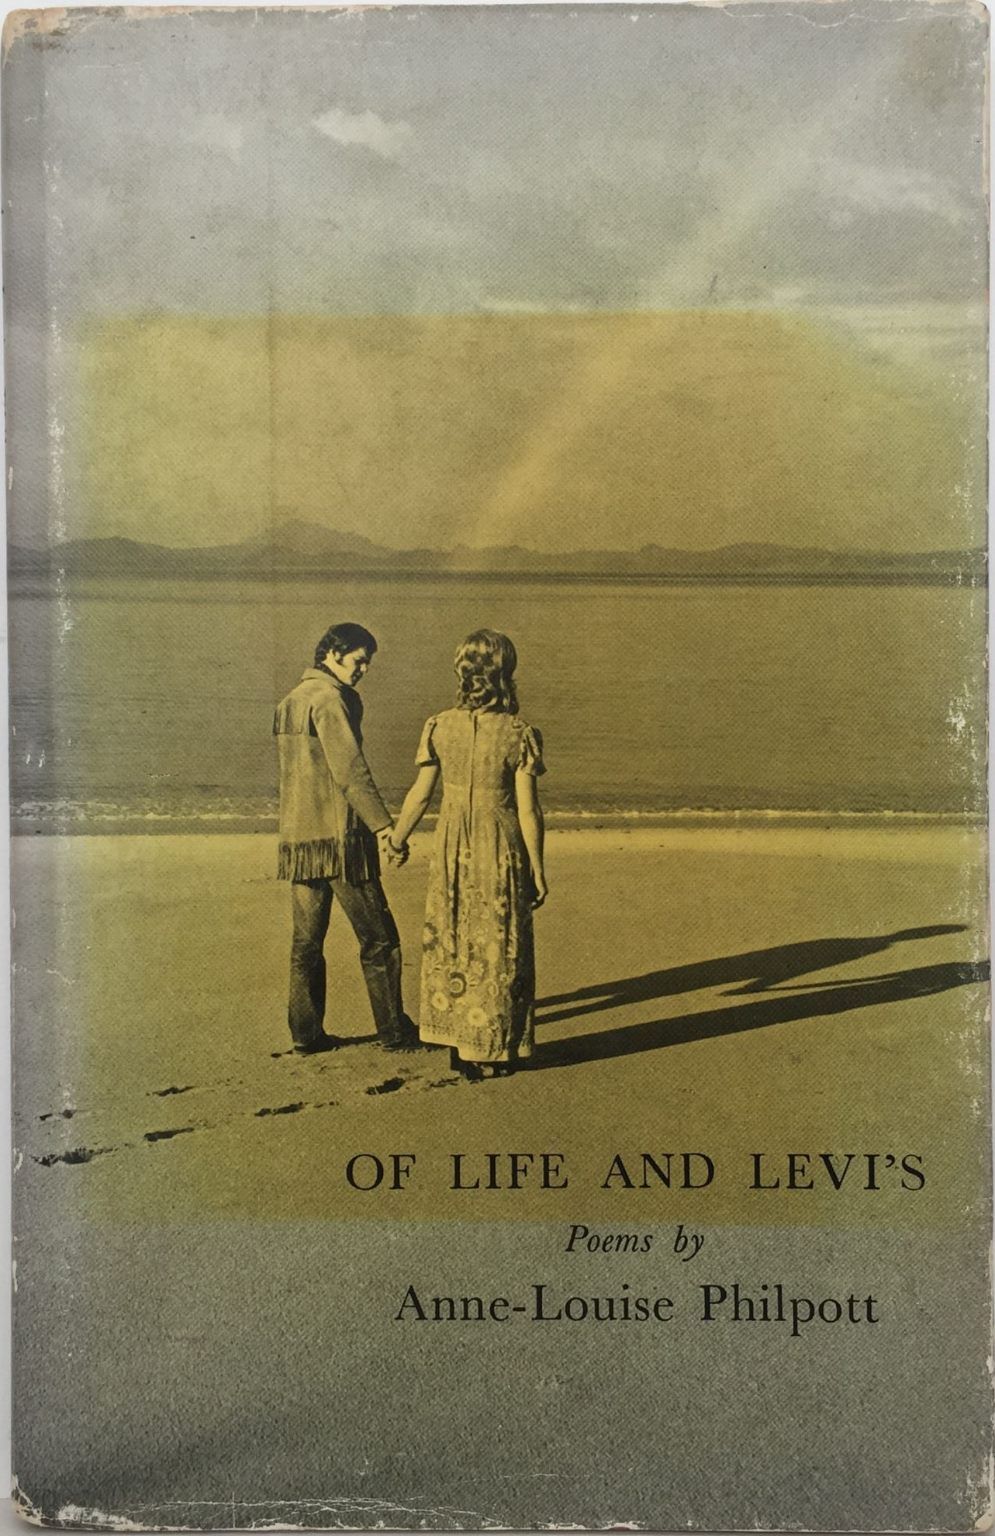 OF LIFE AND LEVI'S: Selected Poems